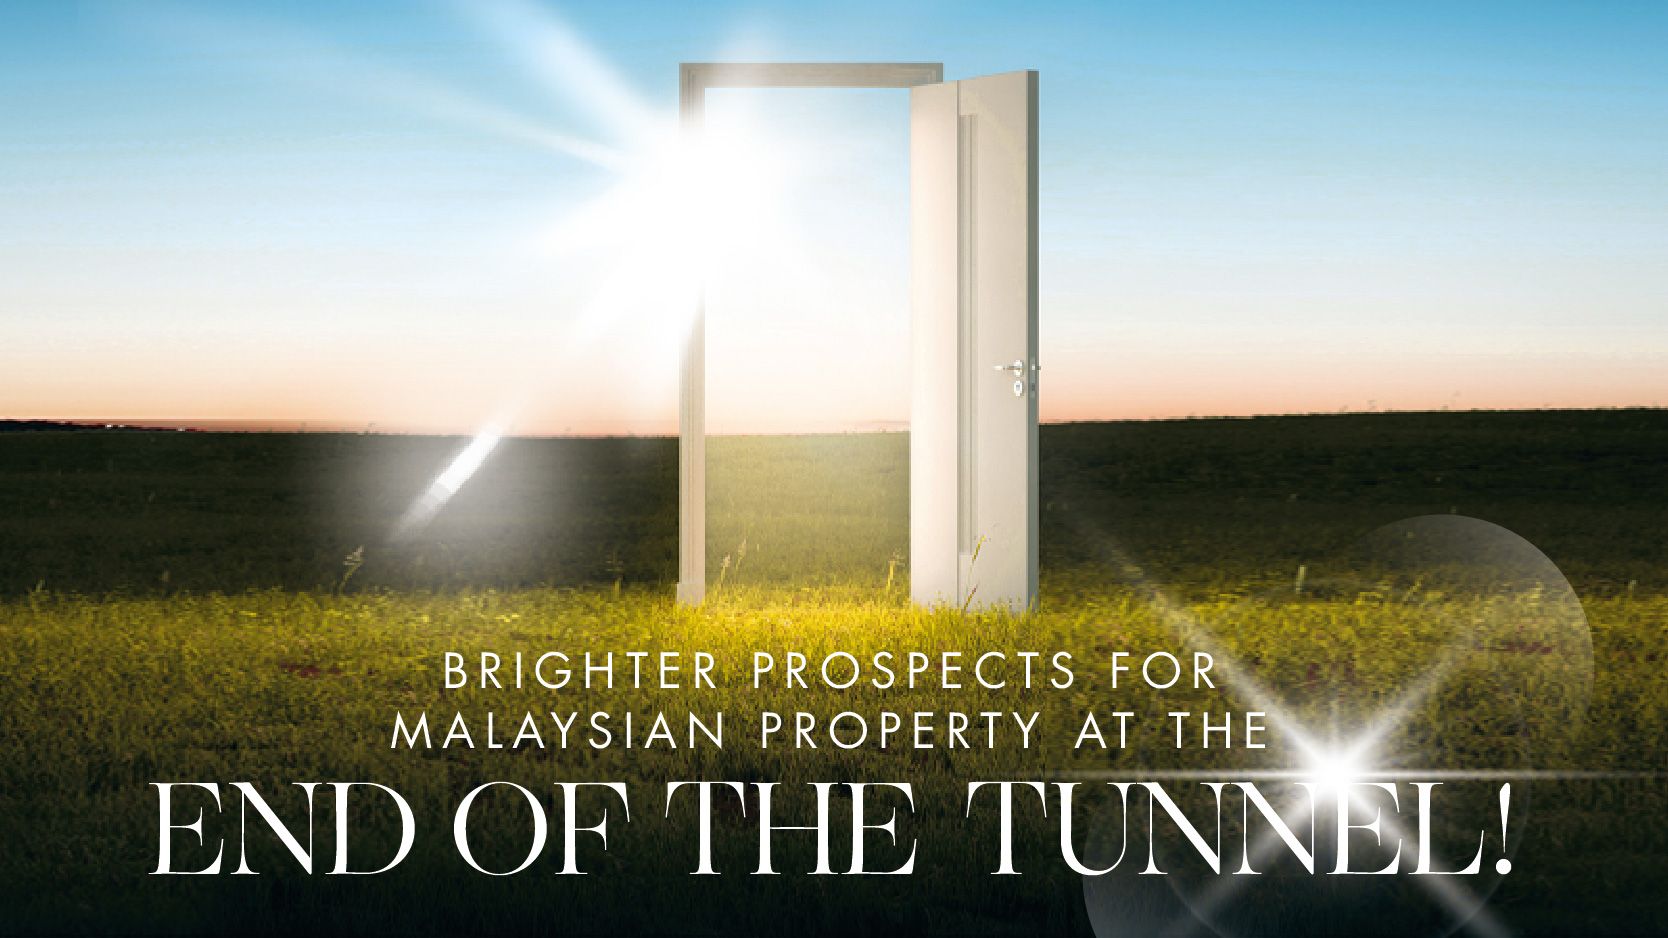 Brighter prospects for Malaysian property at the end of the tunnel!